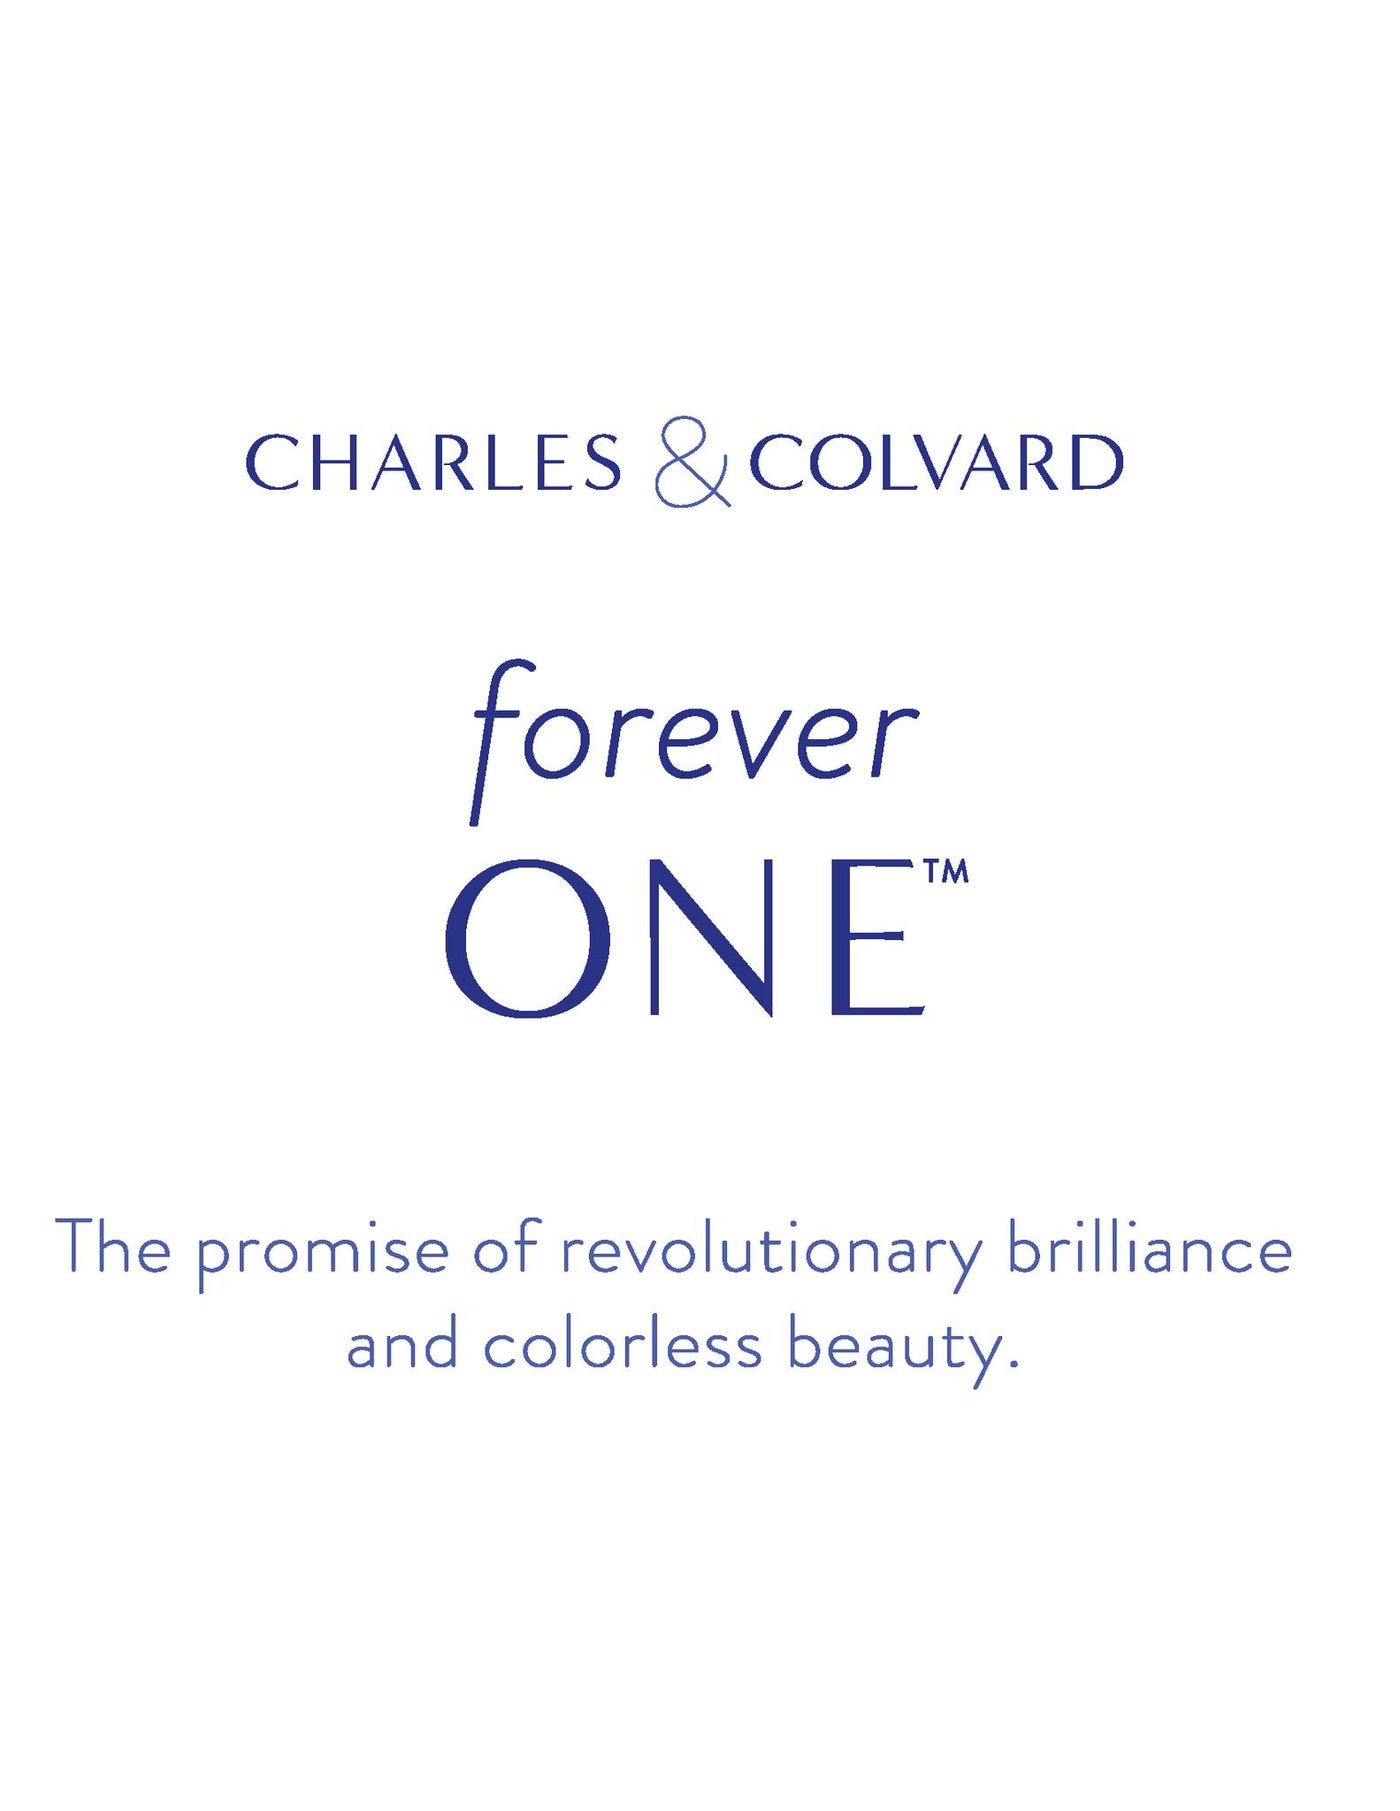 Certified Round Forever One Charles & Colvard Loose Moissanite Stone - 1.00 Carats - D Color - VVS1 Clarity-Certified Forever ONE Moissanite-Fire & Brilliance ®